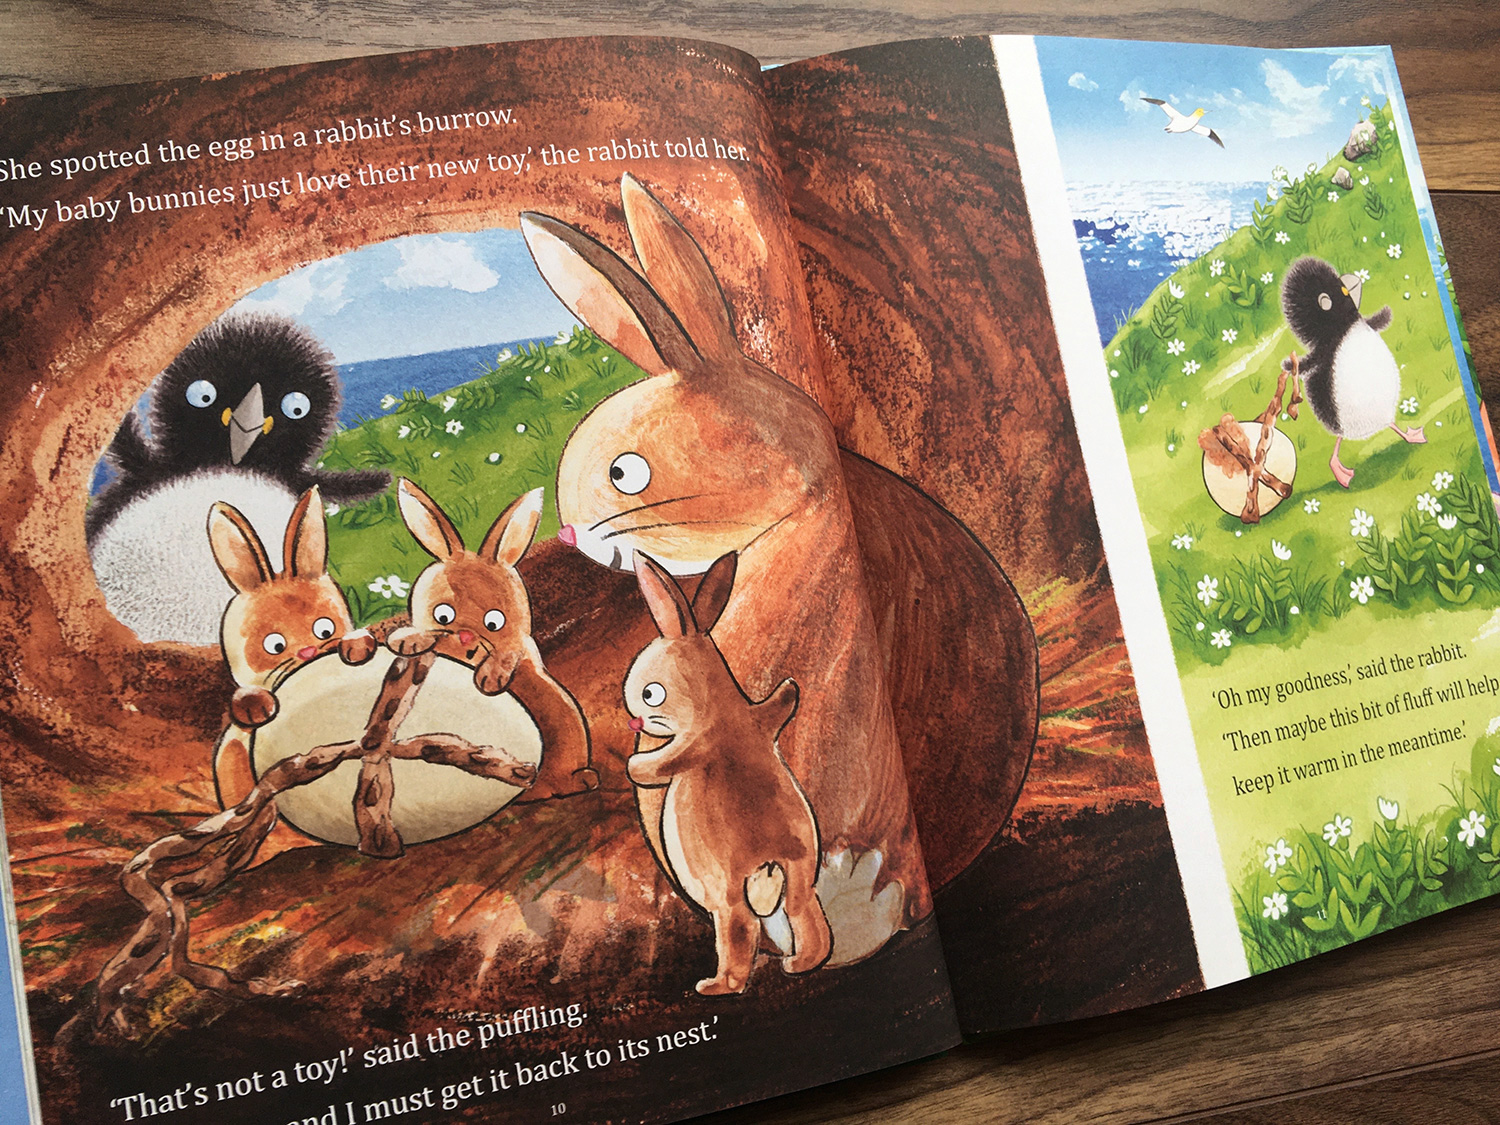 Puffling And The Egg scene where Puffling meets a bunnies in their burrow